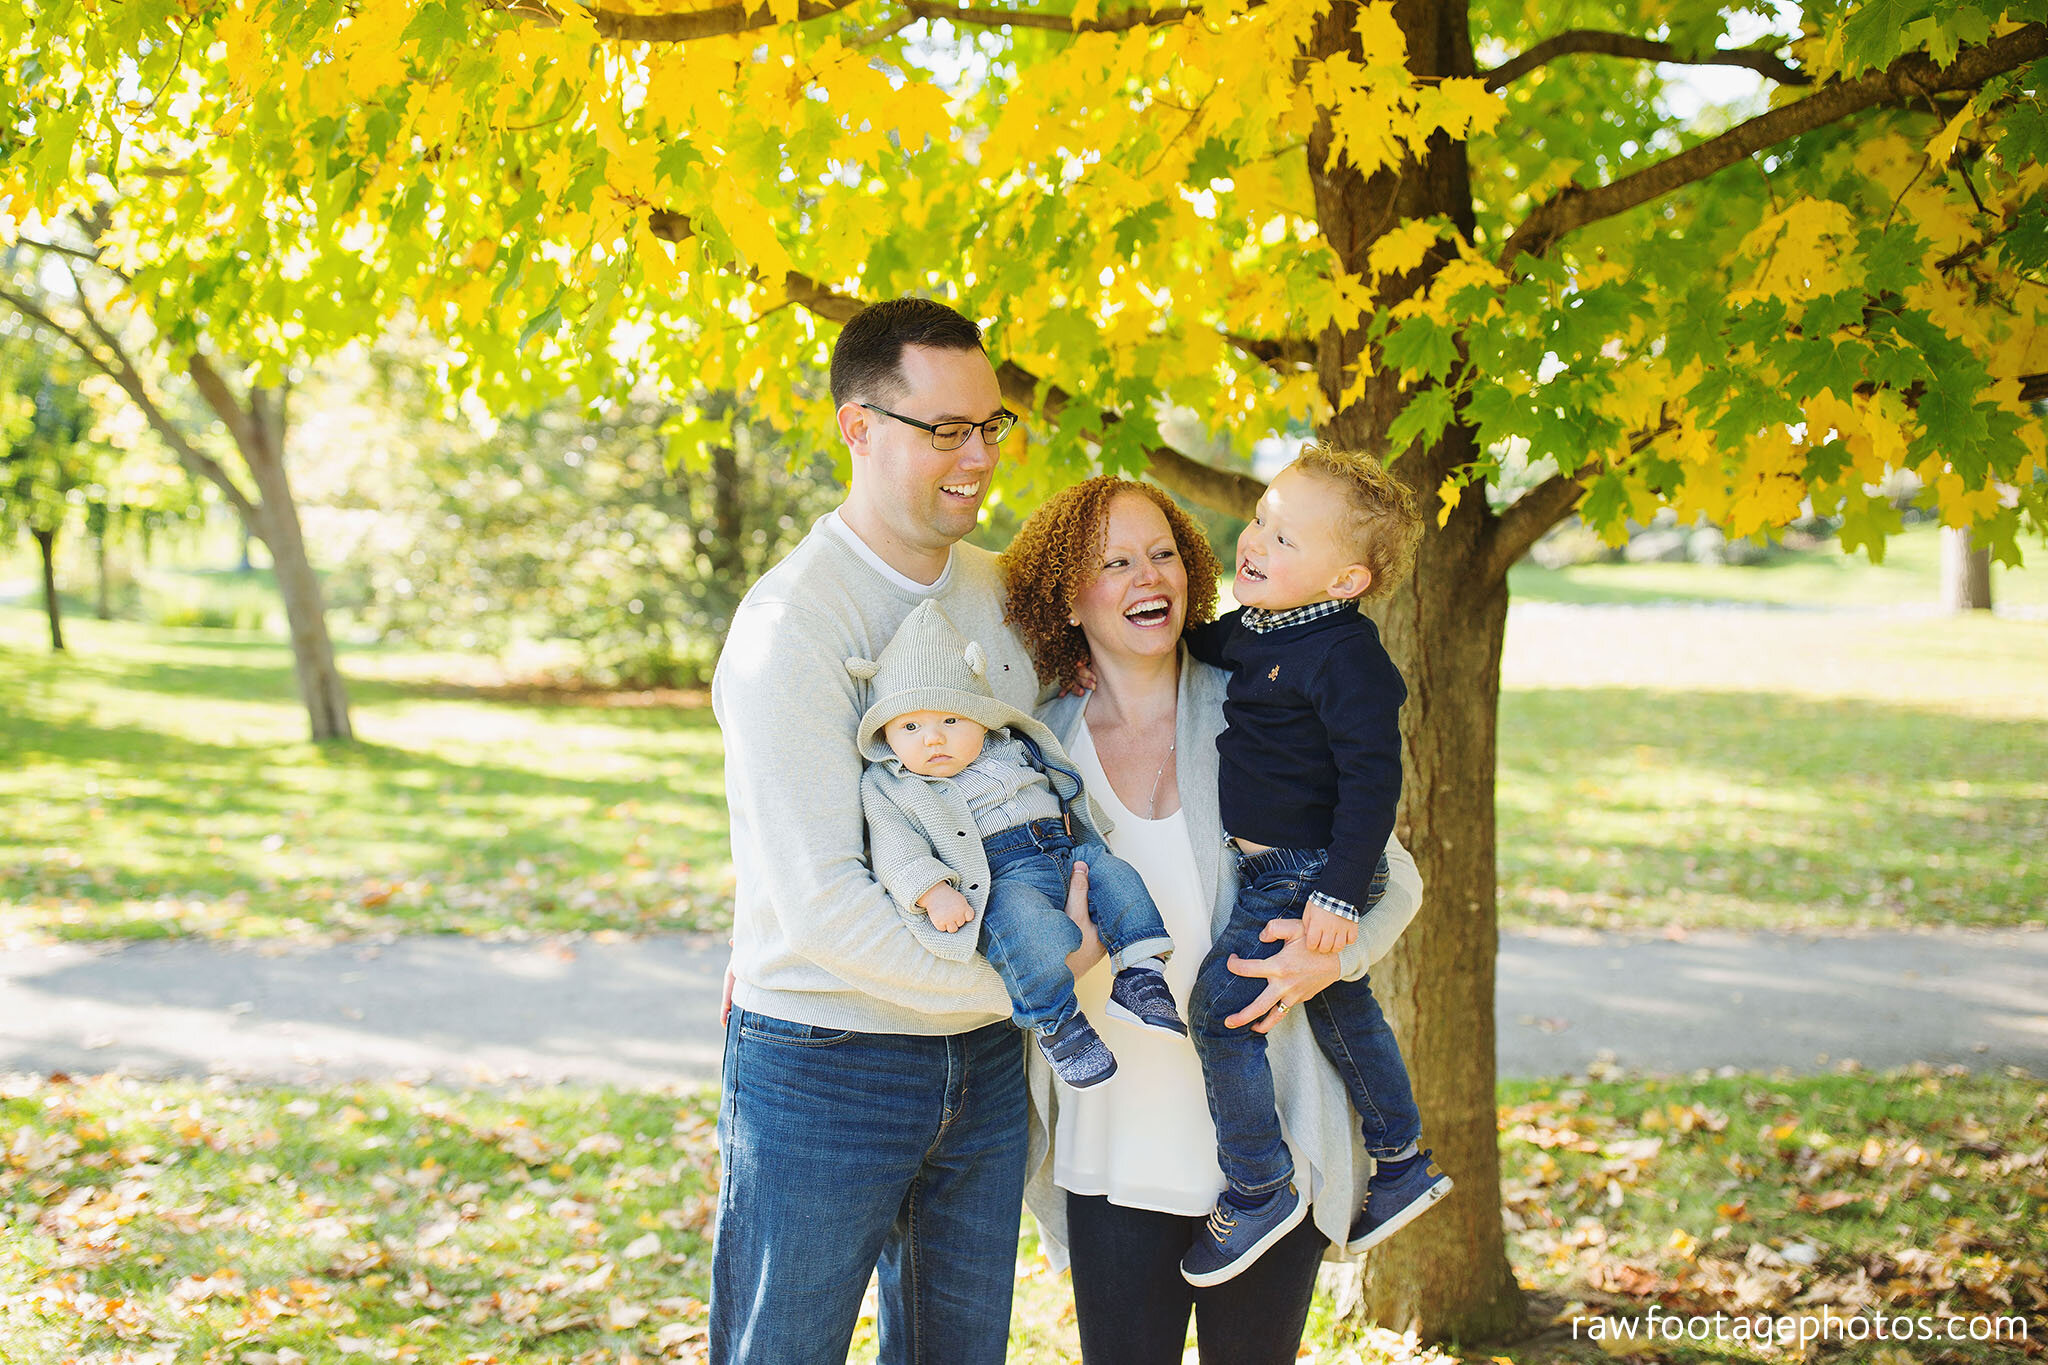 raw_footage_photography-london_ontario_family_photographer-fall_extended_family_session-grandparents-019.jpg